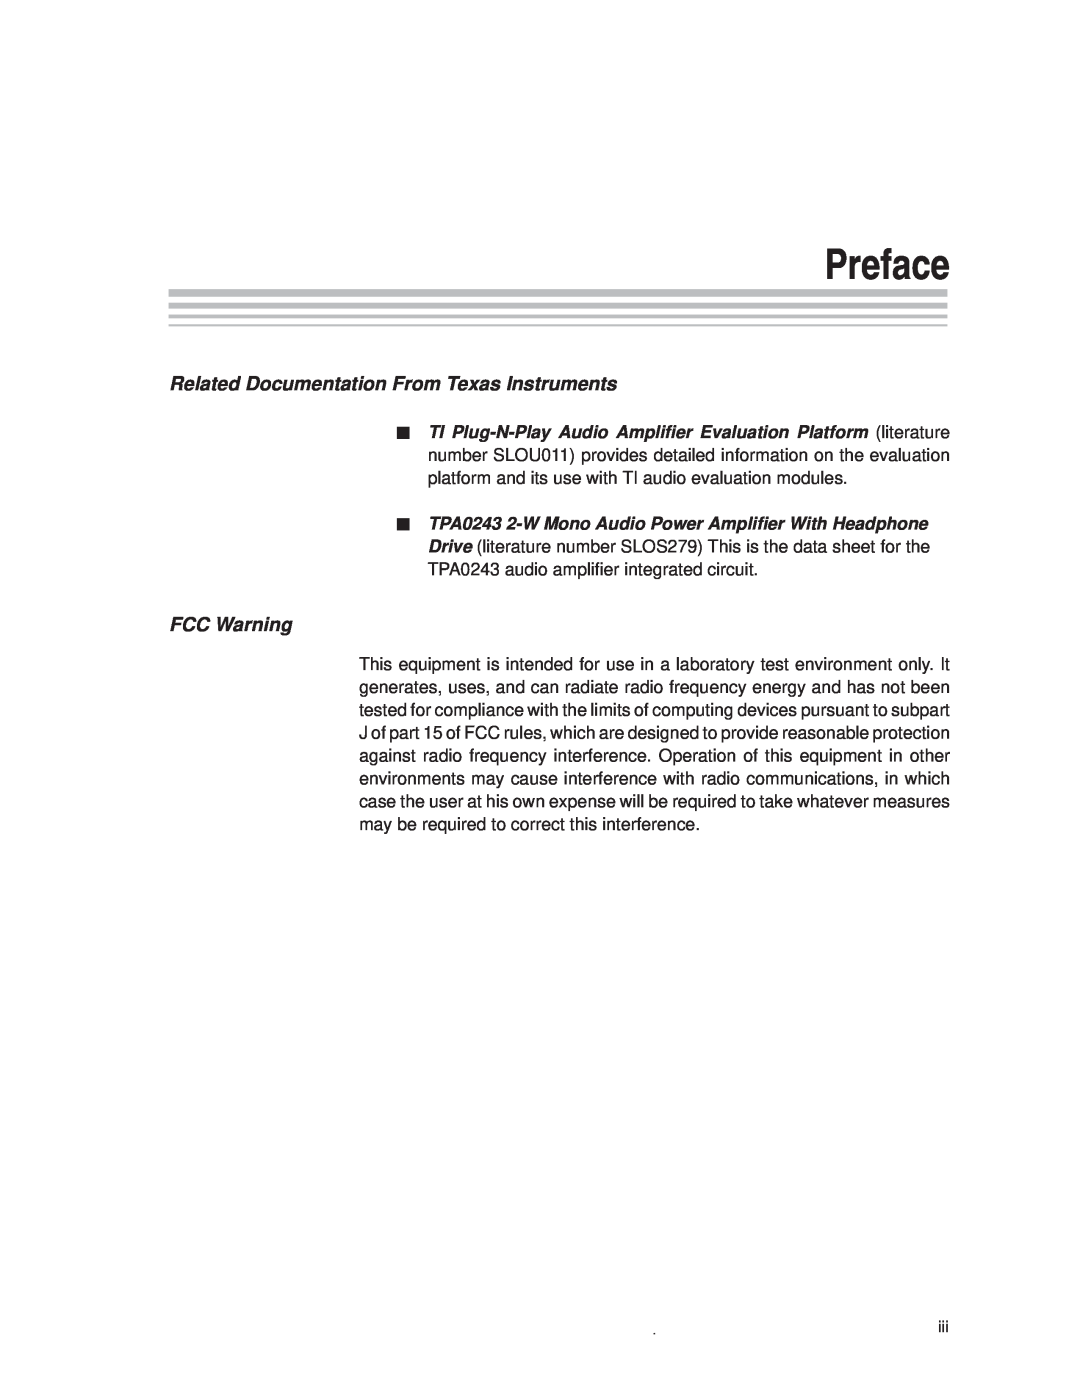 Texas Instruments TPA0243 manual Preface, Related Documentation From Texas Instruments, FCC Warning 